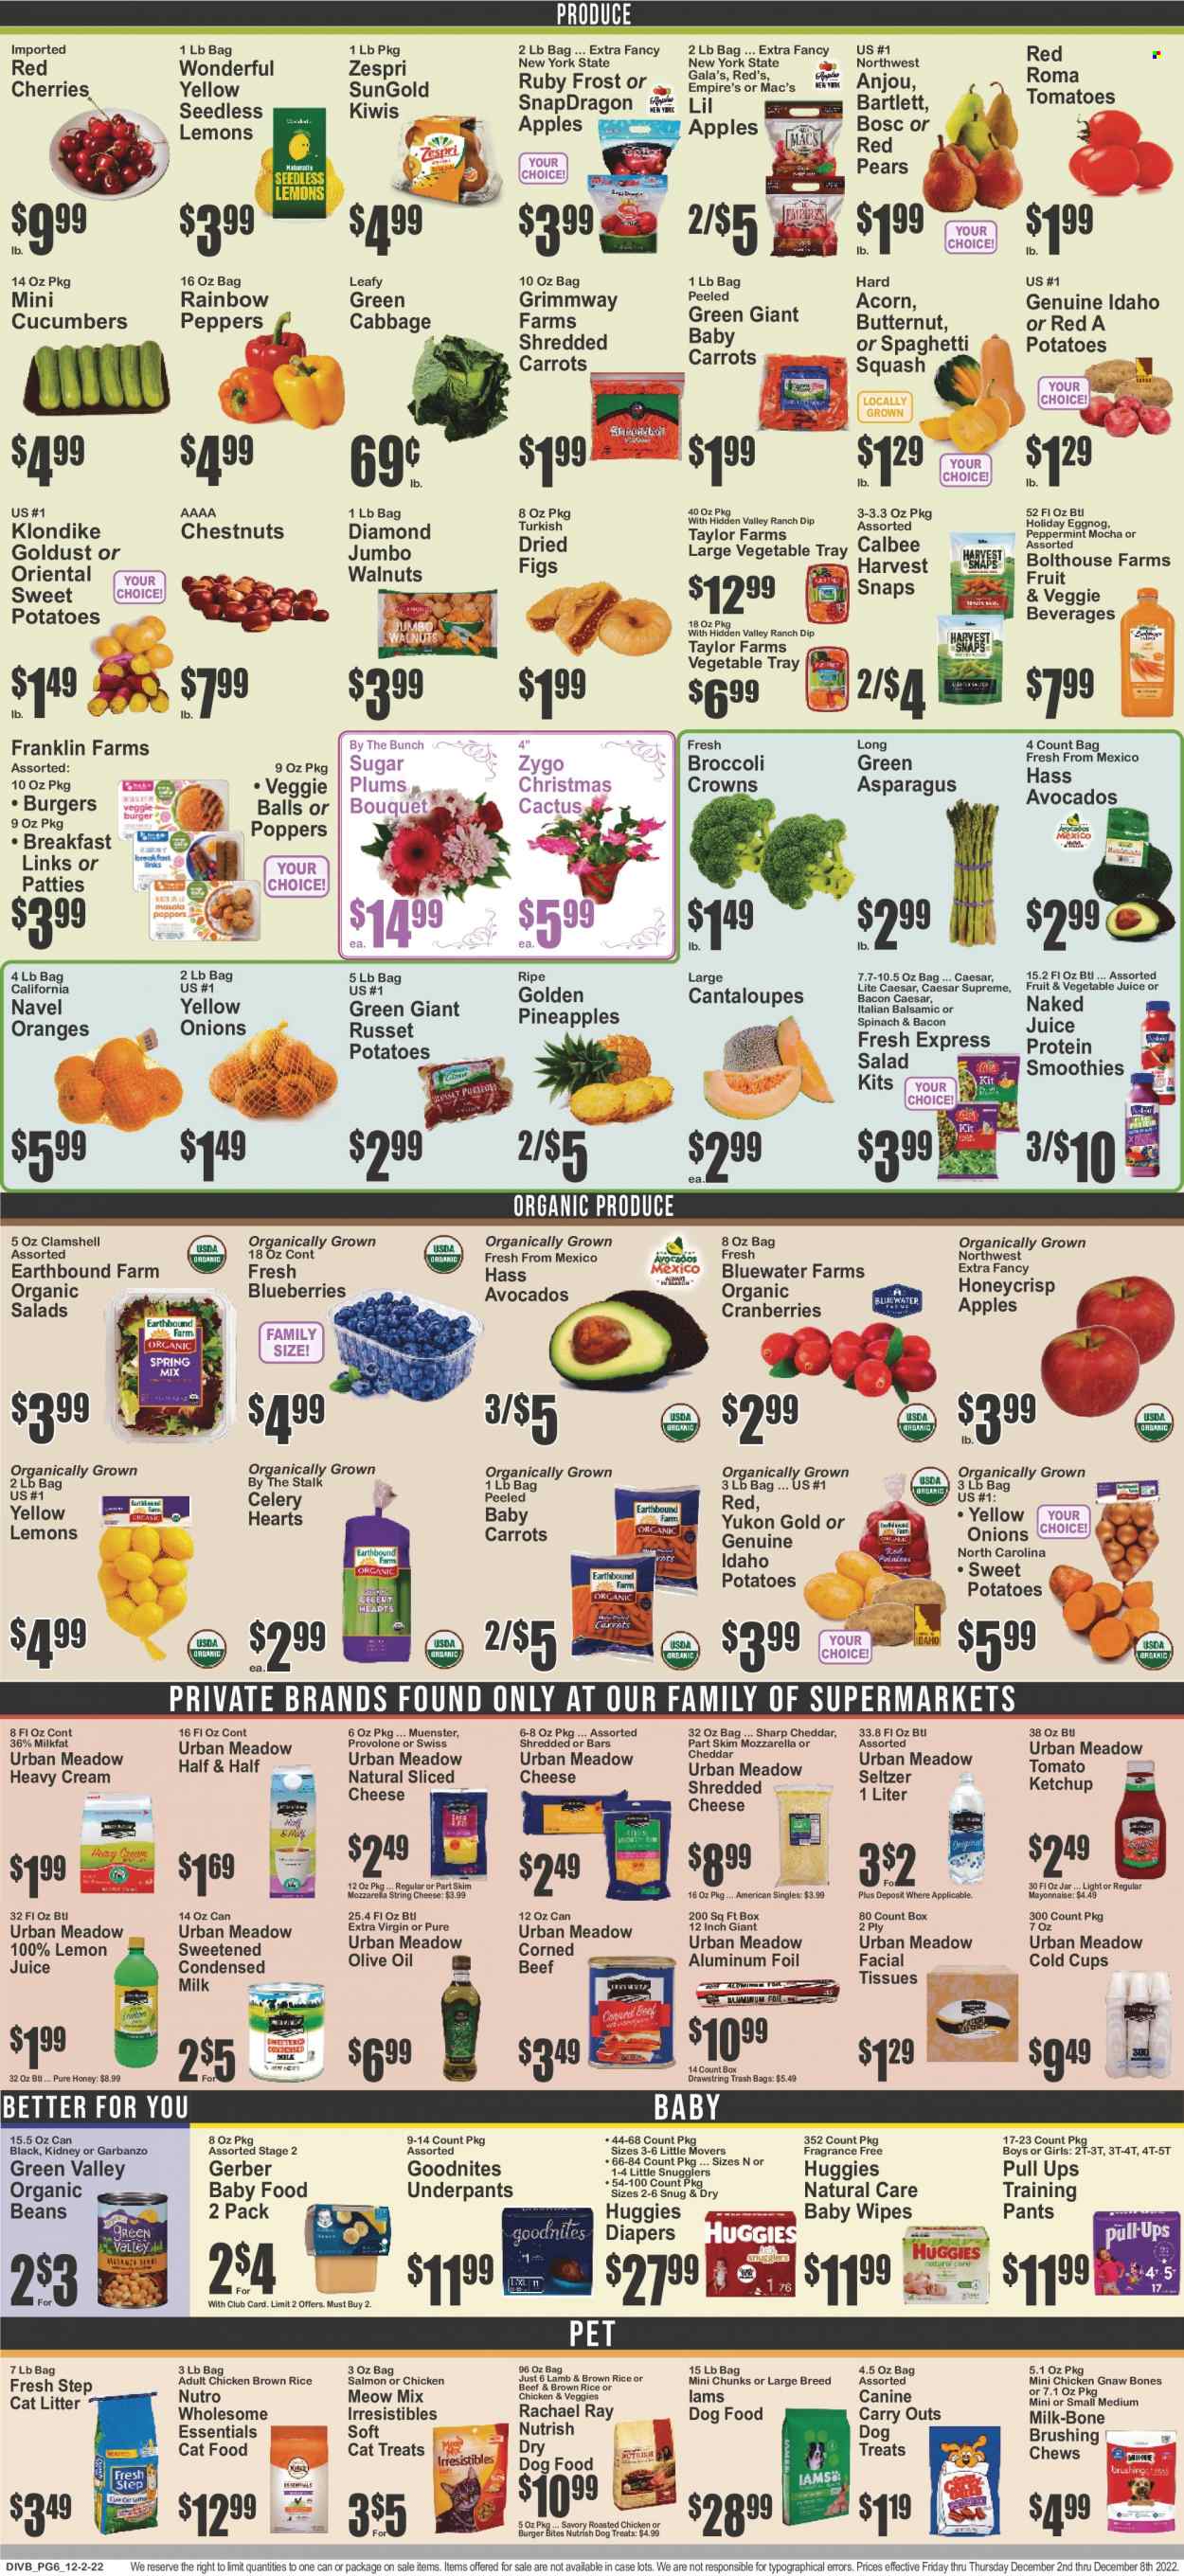 thumbnail - Super Fresh Flyer - 12/02/2022 - 12/08/2022 - Sales products - asparagus, beans, cabbage, cantaloupe, carrots, celery, cucumber, russet potatoes, tomatoes, potatoes, onion, salad, peppers, sleeved celery, apples, avocado, blueberries, figs, Gala, kiwi, pineapple, plums, cherries, pears, oranges, chicken roast, hamburger, corned beef, mozzarella, shredded cheese, sliced cheese, string cheese, Münster cheese, Provolone, milk, condensed milk, mayonnaise, dip, chewing gum, Gerber, sugar, Harvest Snaps, cranberries, brown rice, ketchup, extra virgin olive oil, olive oil, walnuts, chestnuts, dried figs, vegetable juice, smoothie, seltzer water, lemon juice, eggnog, Mac’s, beef meat, wipes, Huggies, pants, baby wipes, nappies, baby pants, tissues, facial tissues, butternut squash, underpants, Half and half, navel oranges. Page 6.